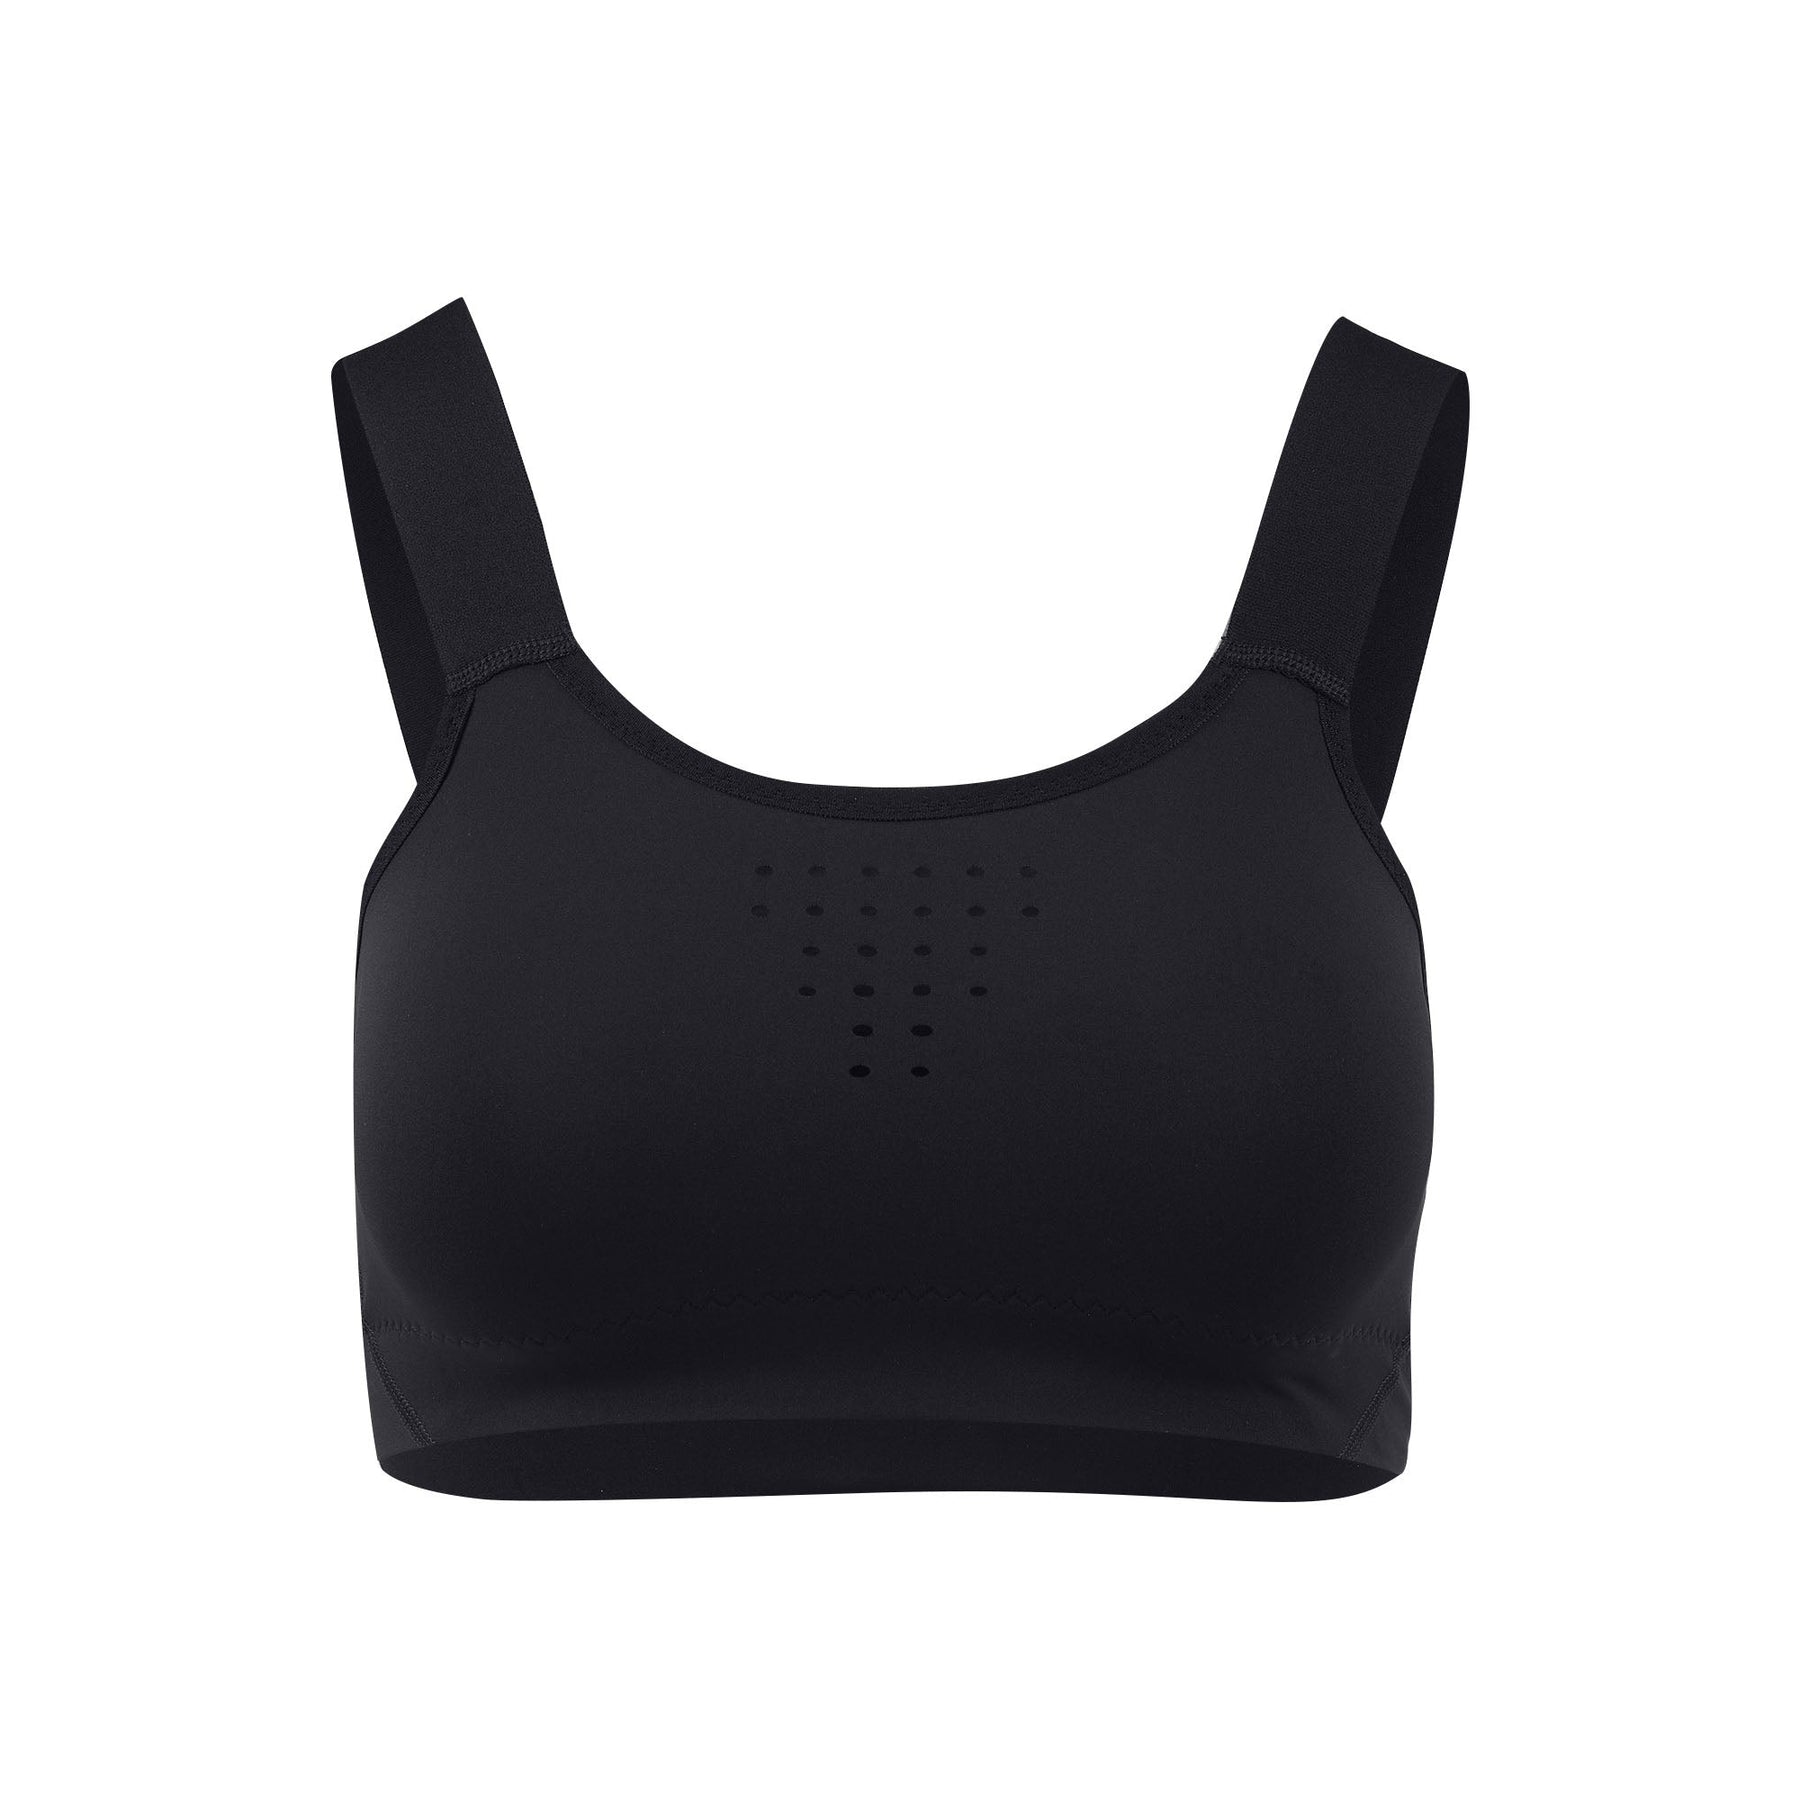 Women's - Compression Fit Sport Bras or Sleeveless in White or Blue or Gray